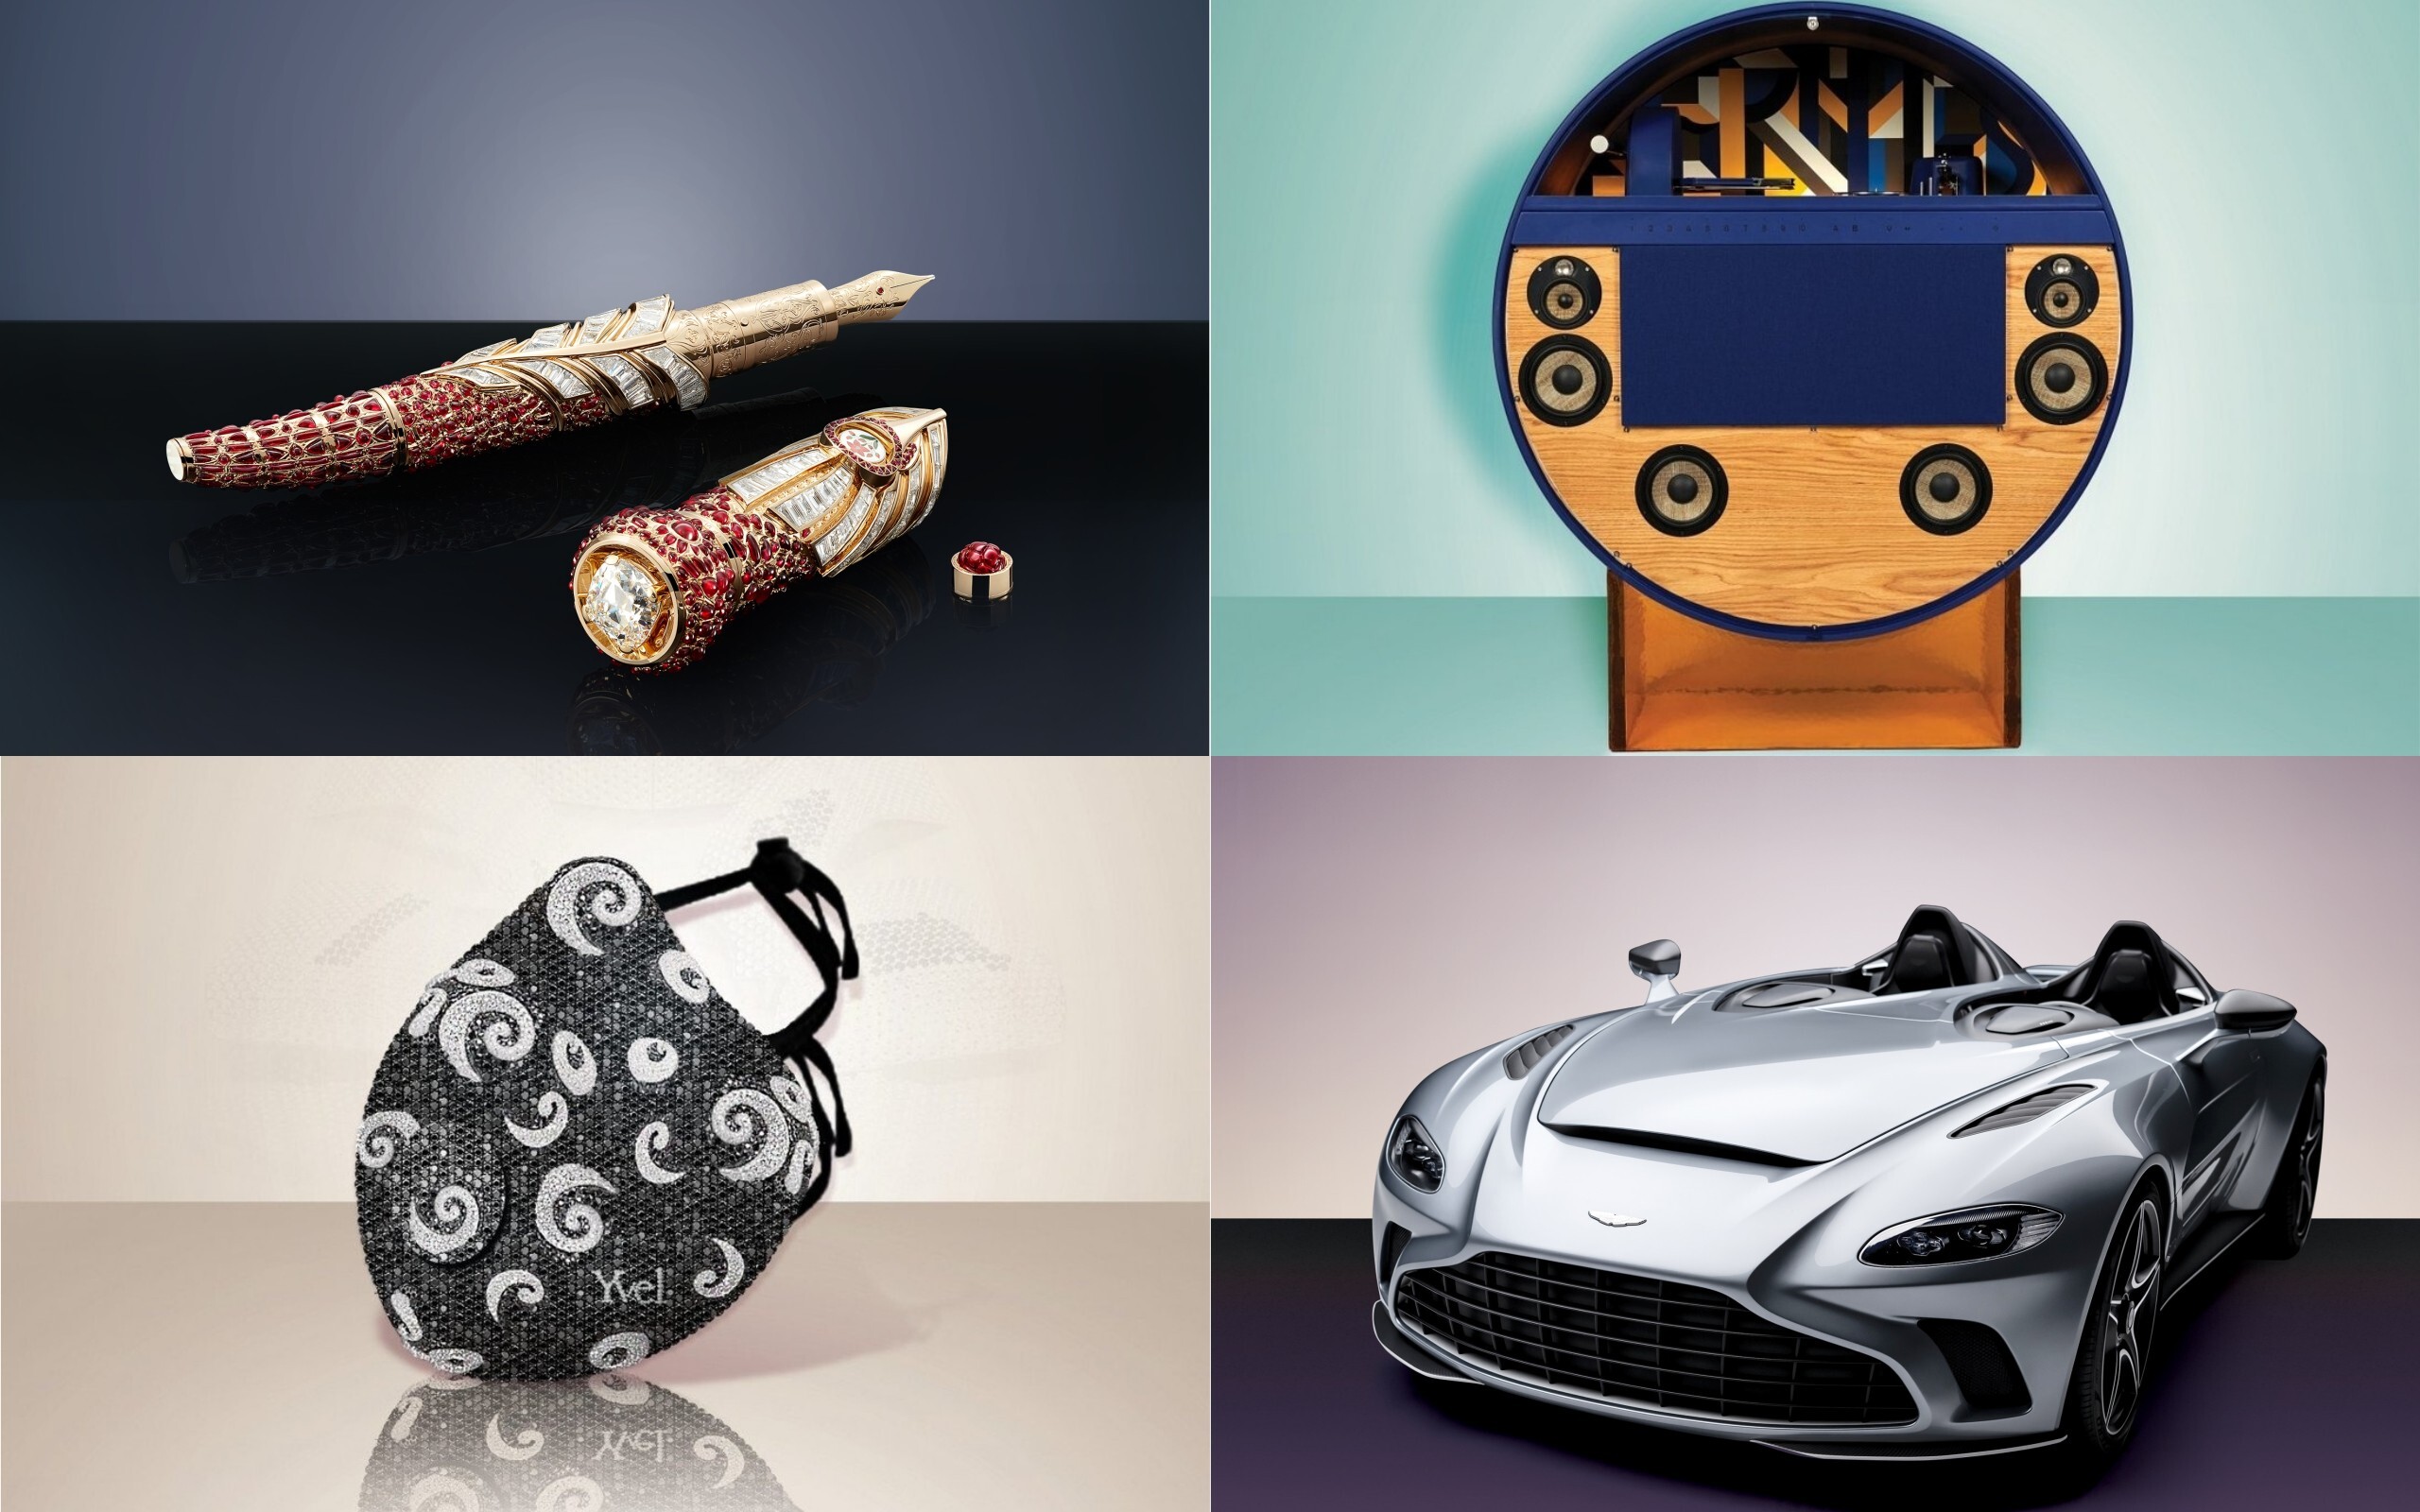 Clockwise from top left: Montblanc’s Insignia of Power pen; Hermès jukebox; Aston Martin’s V12 Speedster; diamond-encrusted face mask. Photos: Handouts